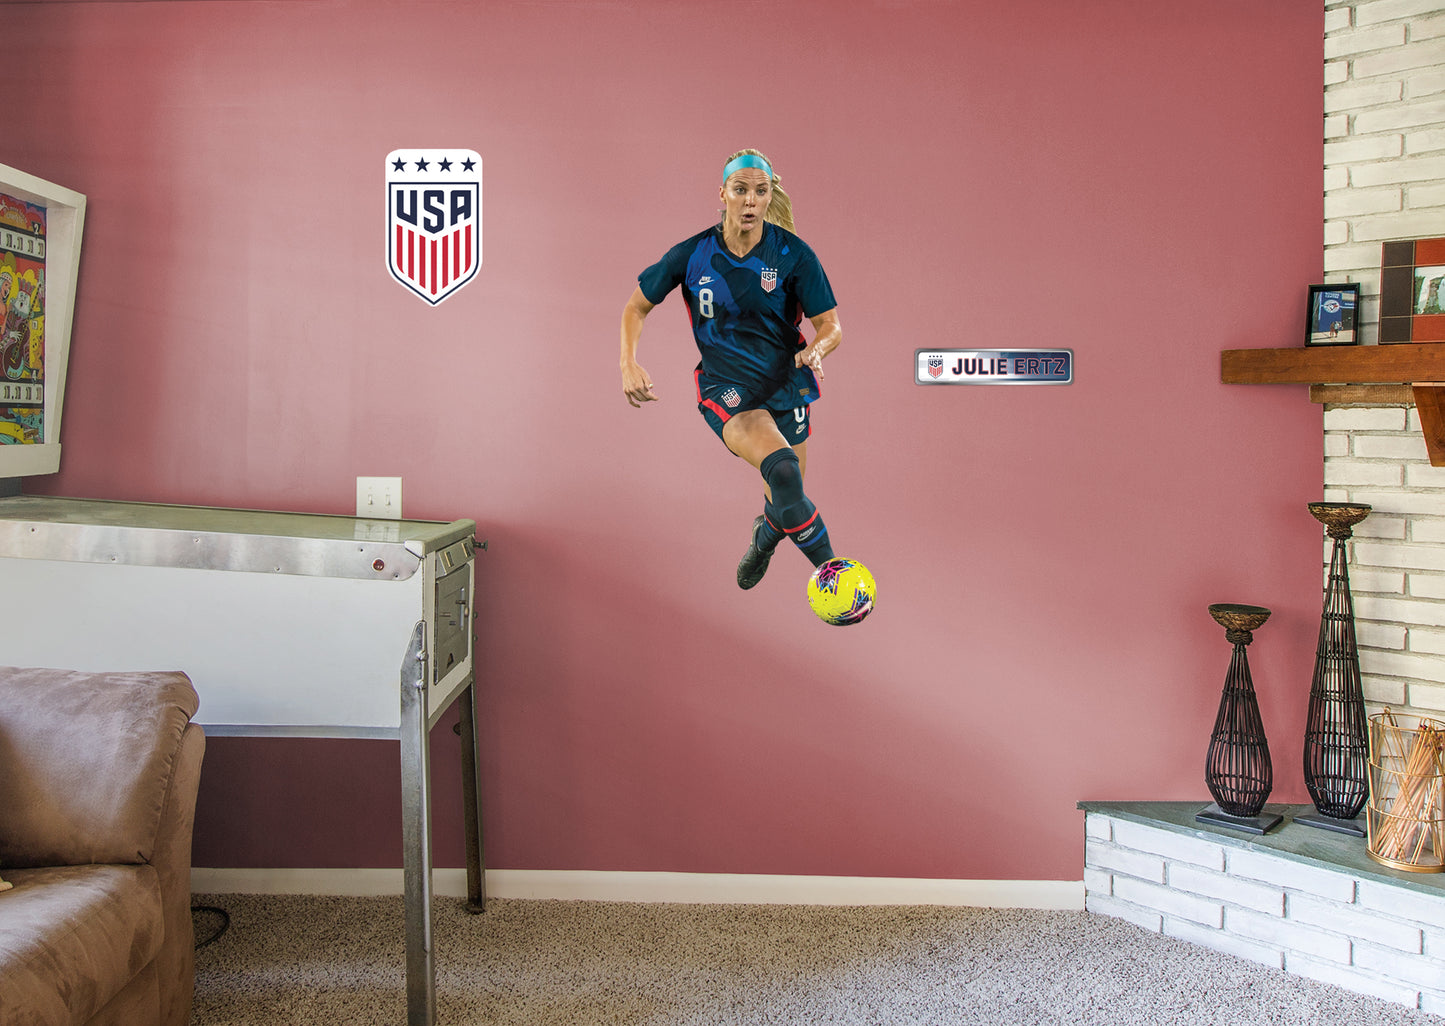 Julie Ertz - Officially Licensed US Soccer Removable Adhesive Decal